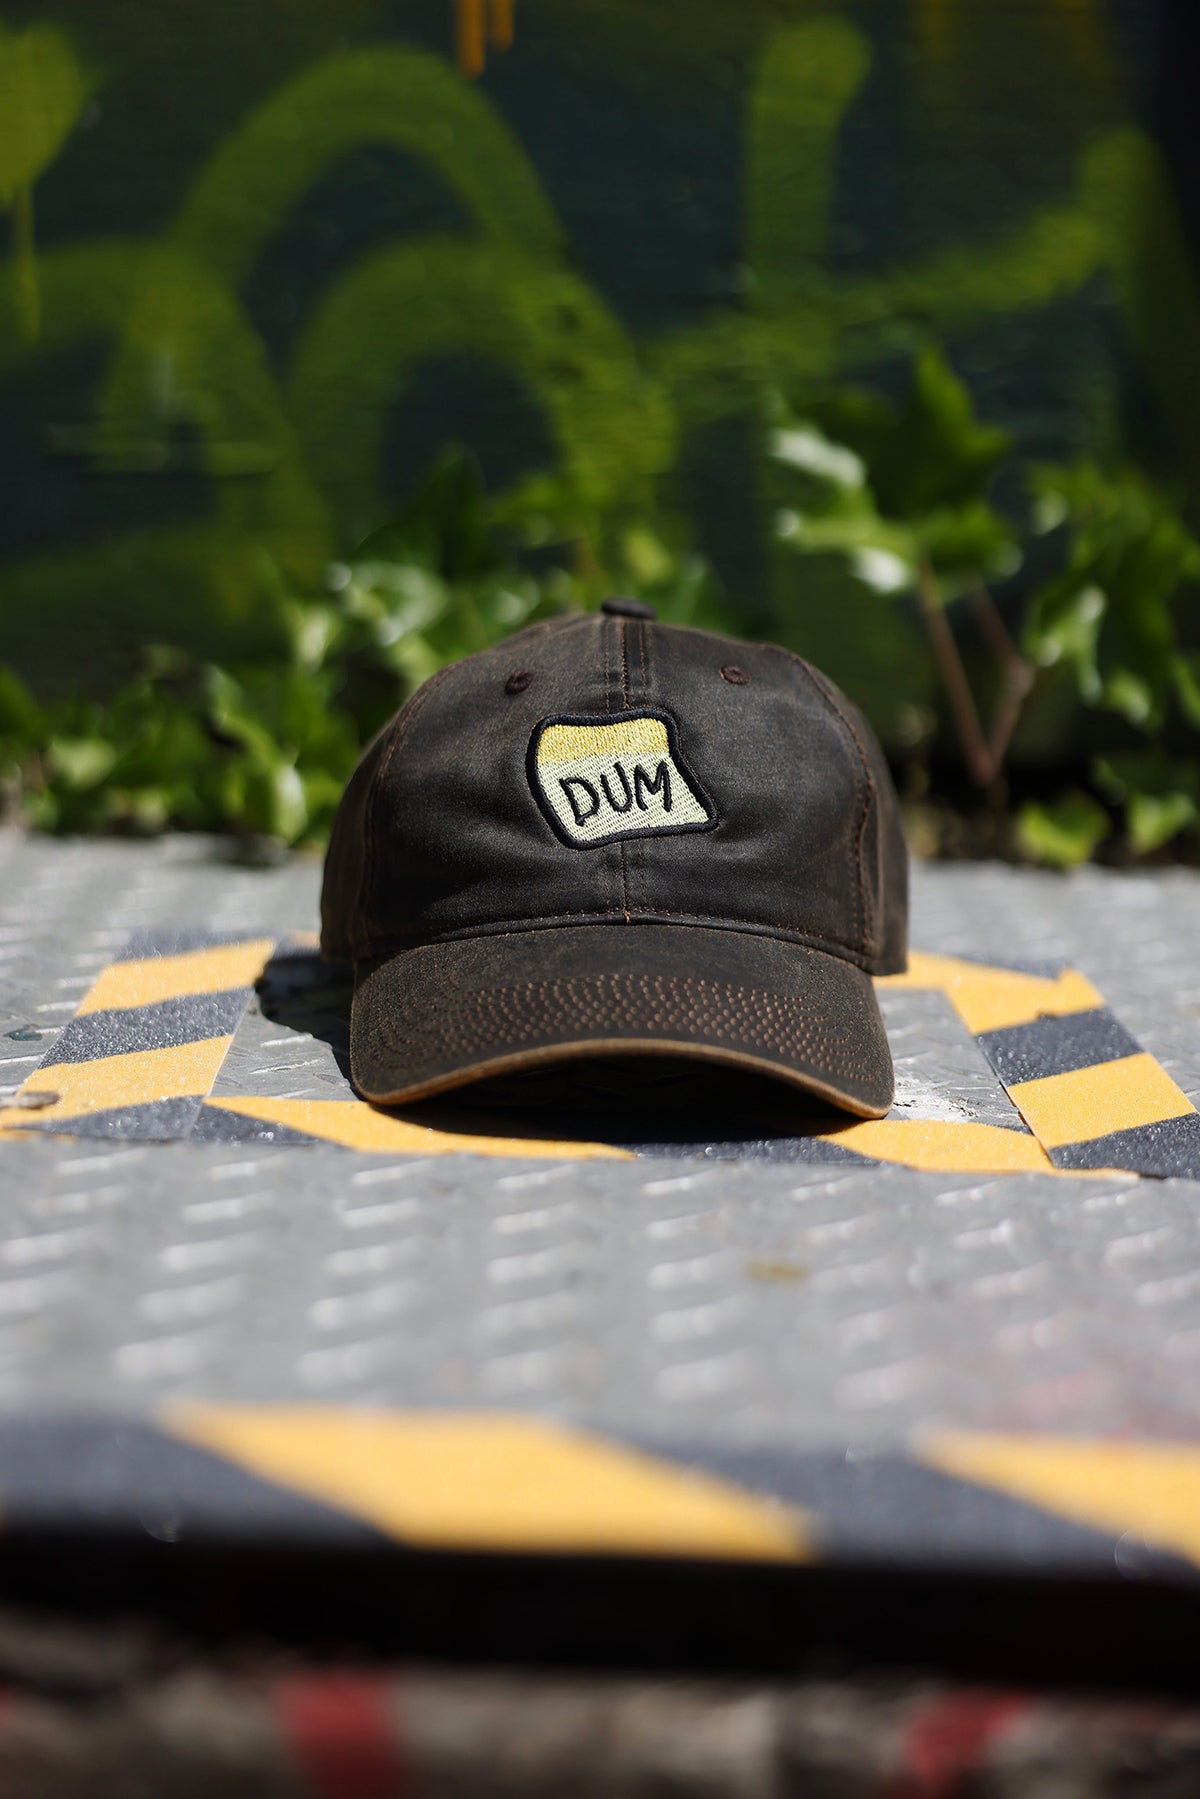 A close up photograph of the brown DUM hat on a metal grate in front of a graffitied wall background.